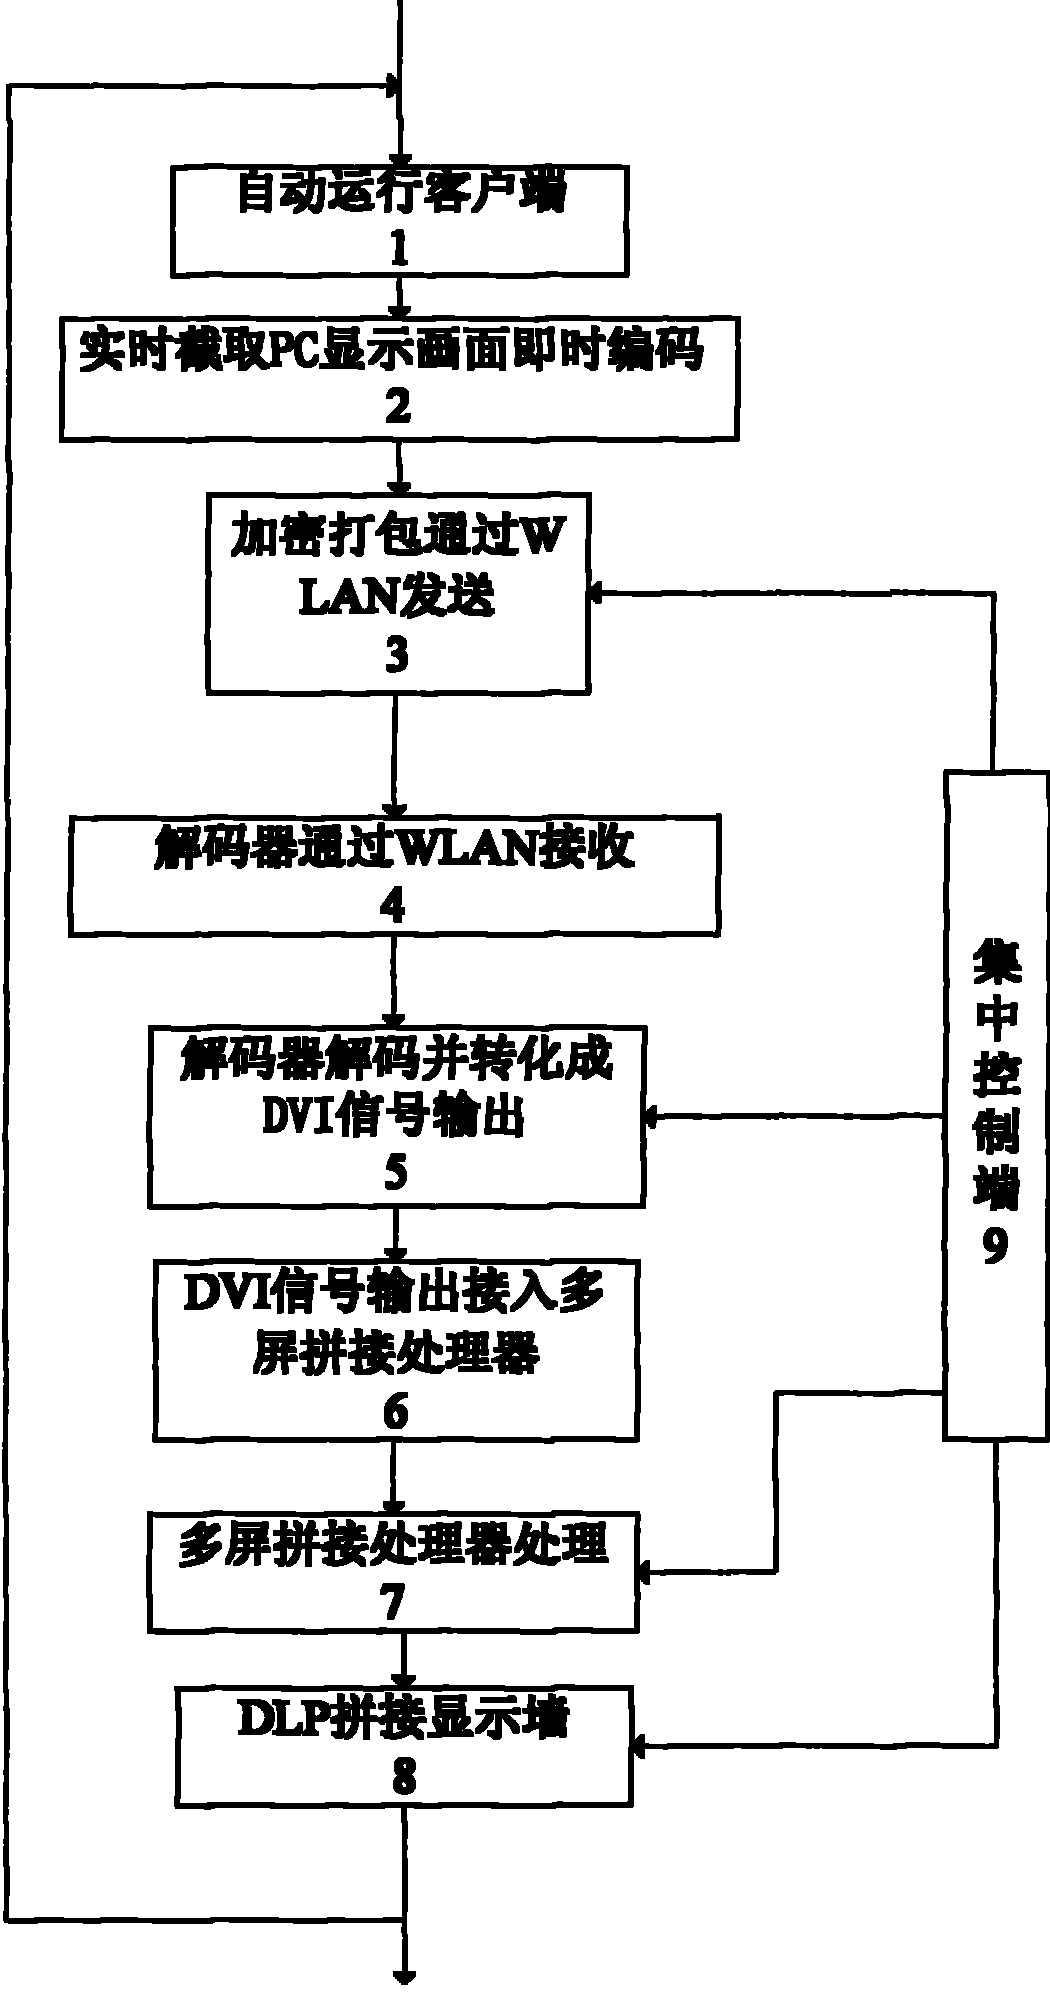 Wireless network transmission RGB signal processing method for multi-screen splicing display wall